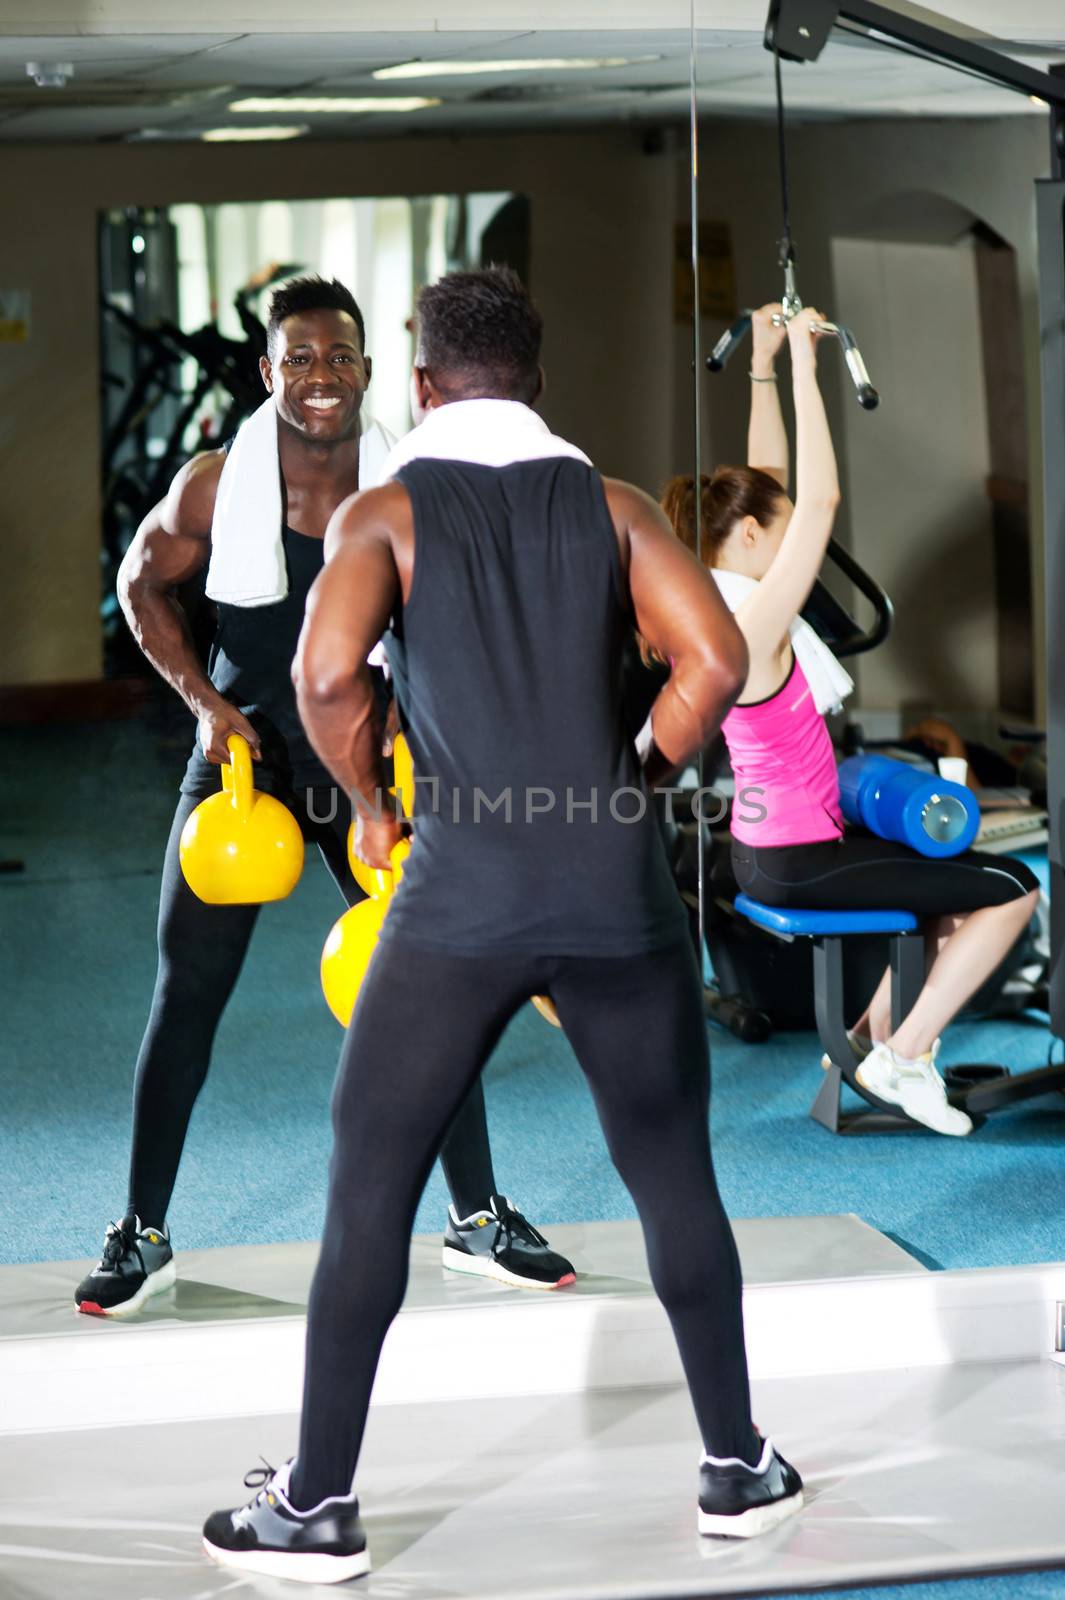 Mirror reflecting people working out in the gym